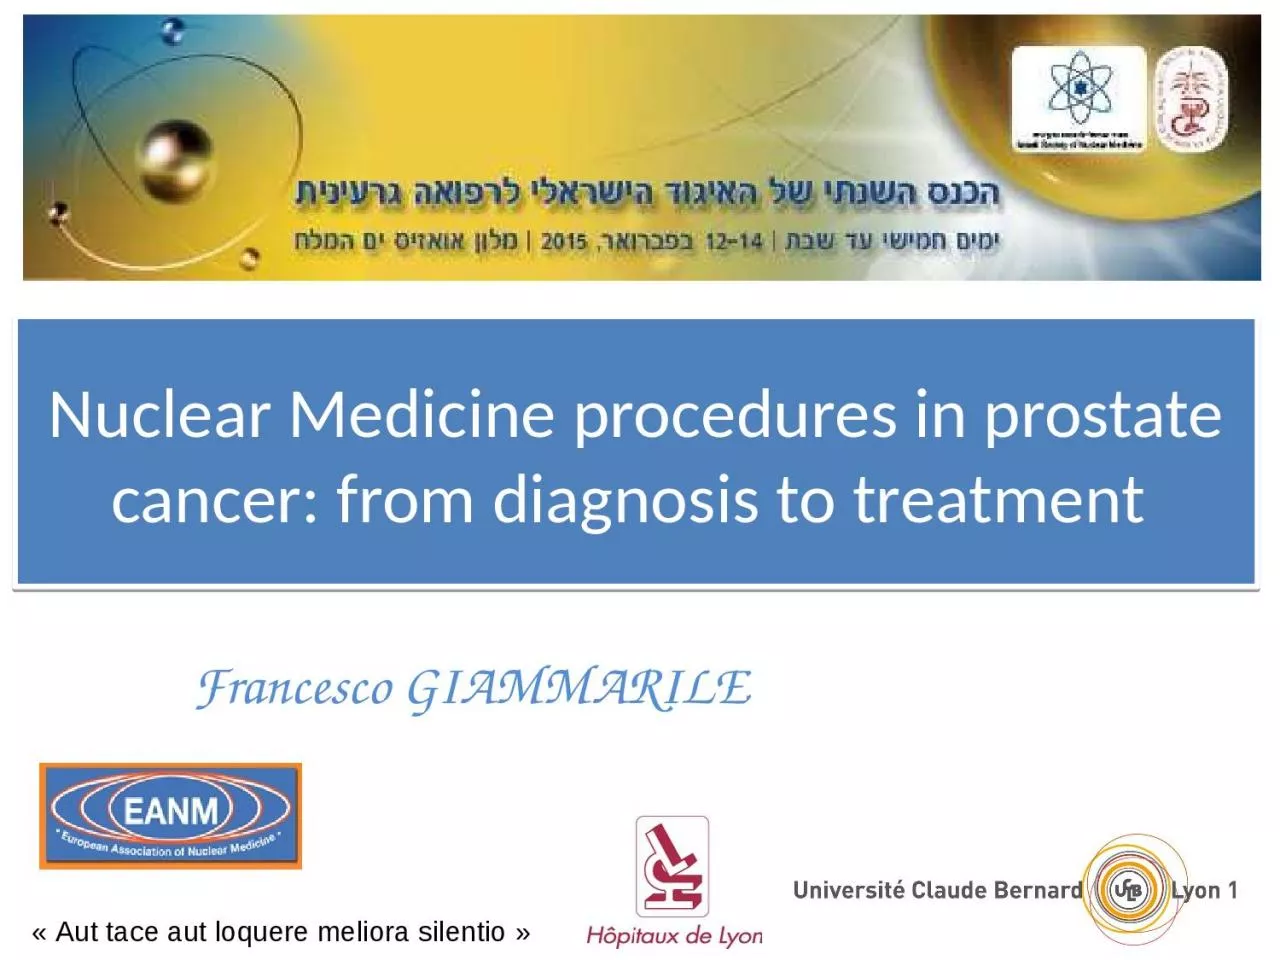 Nuclear Medicine procedures in prostate cancer: from diagnosis to treatment